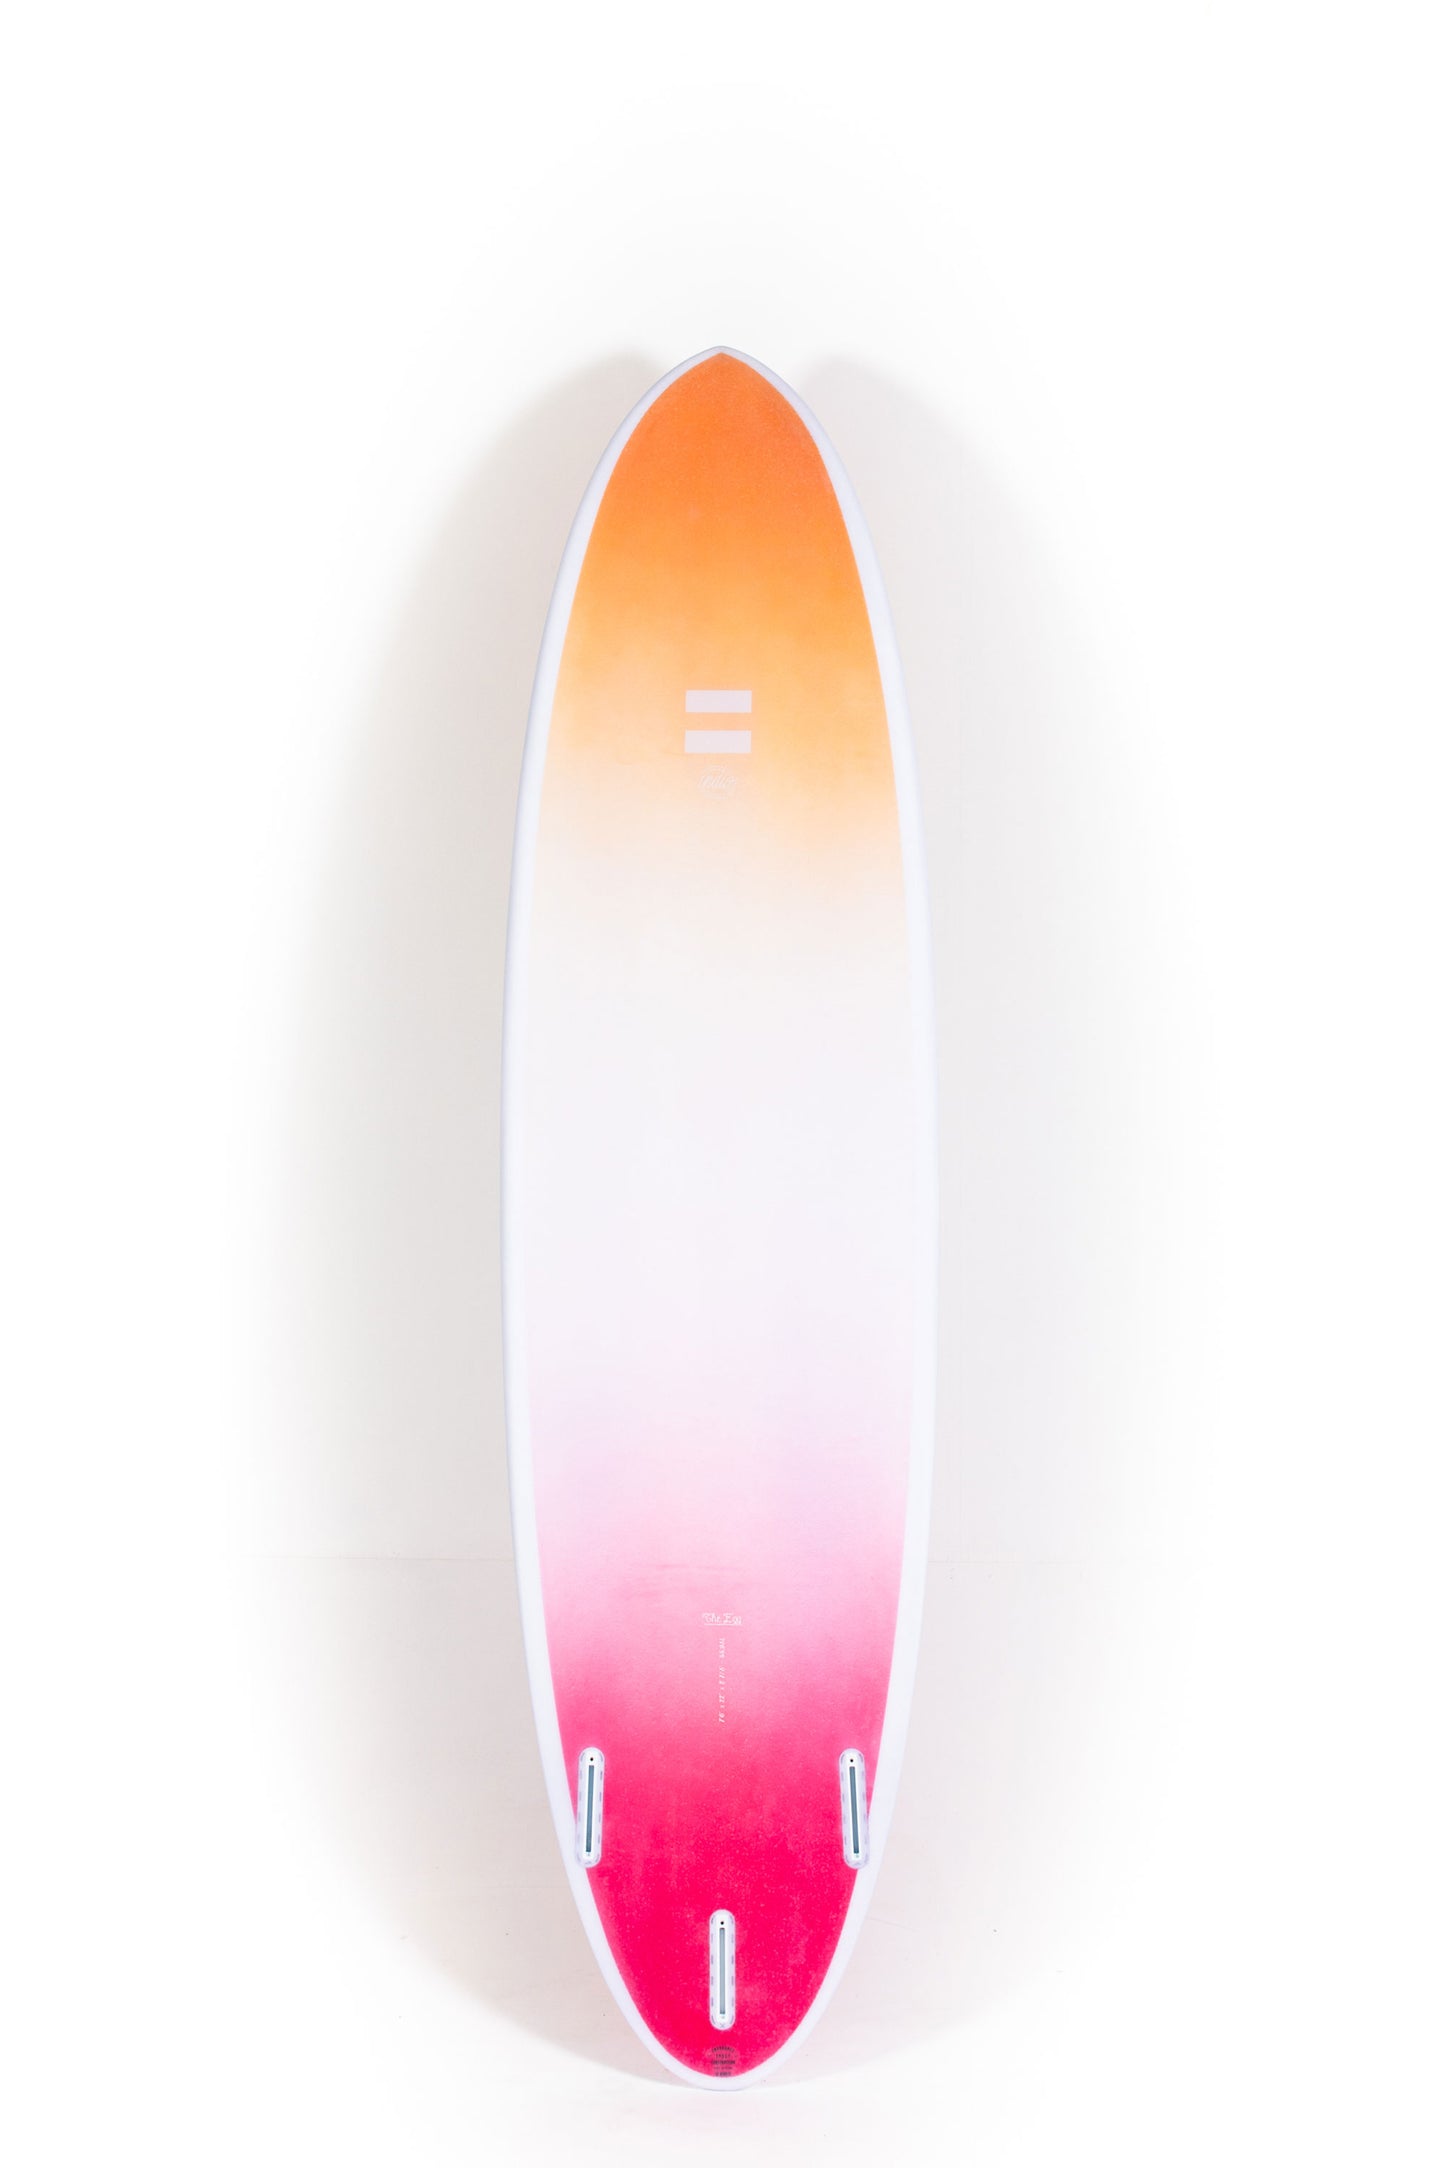 Pukas Surf Shop - Indio Surfboards - THE EGG Space - 7'6" x 22 x 2 7/8 - 55,98L - TB - INECEG0706SPA